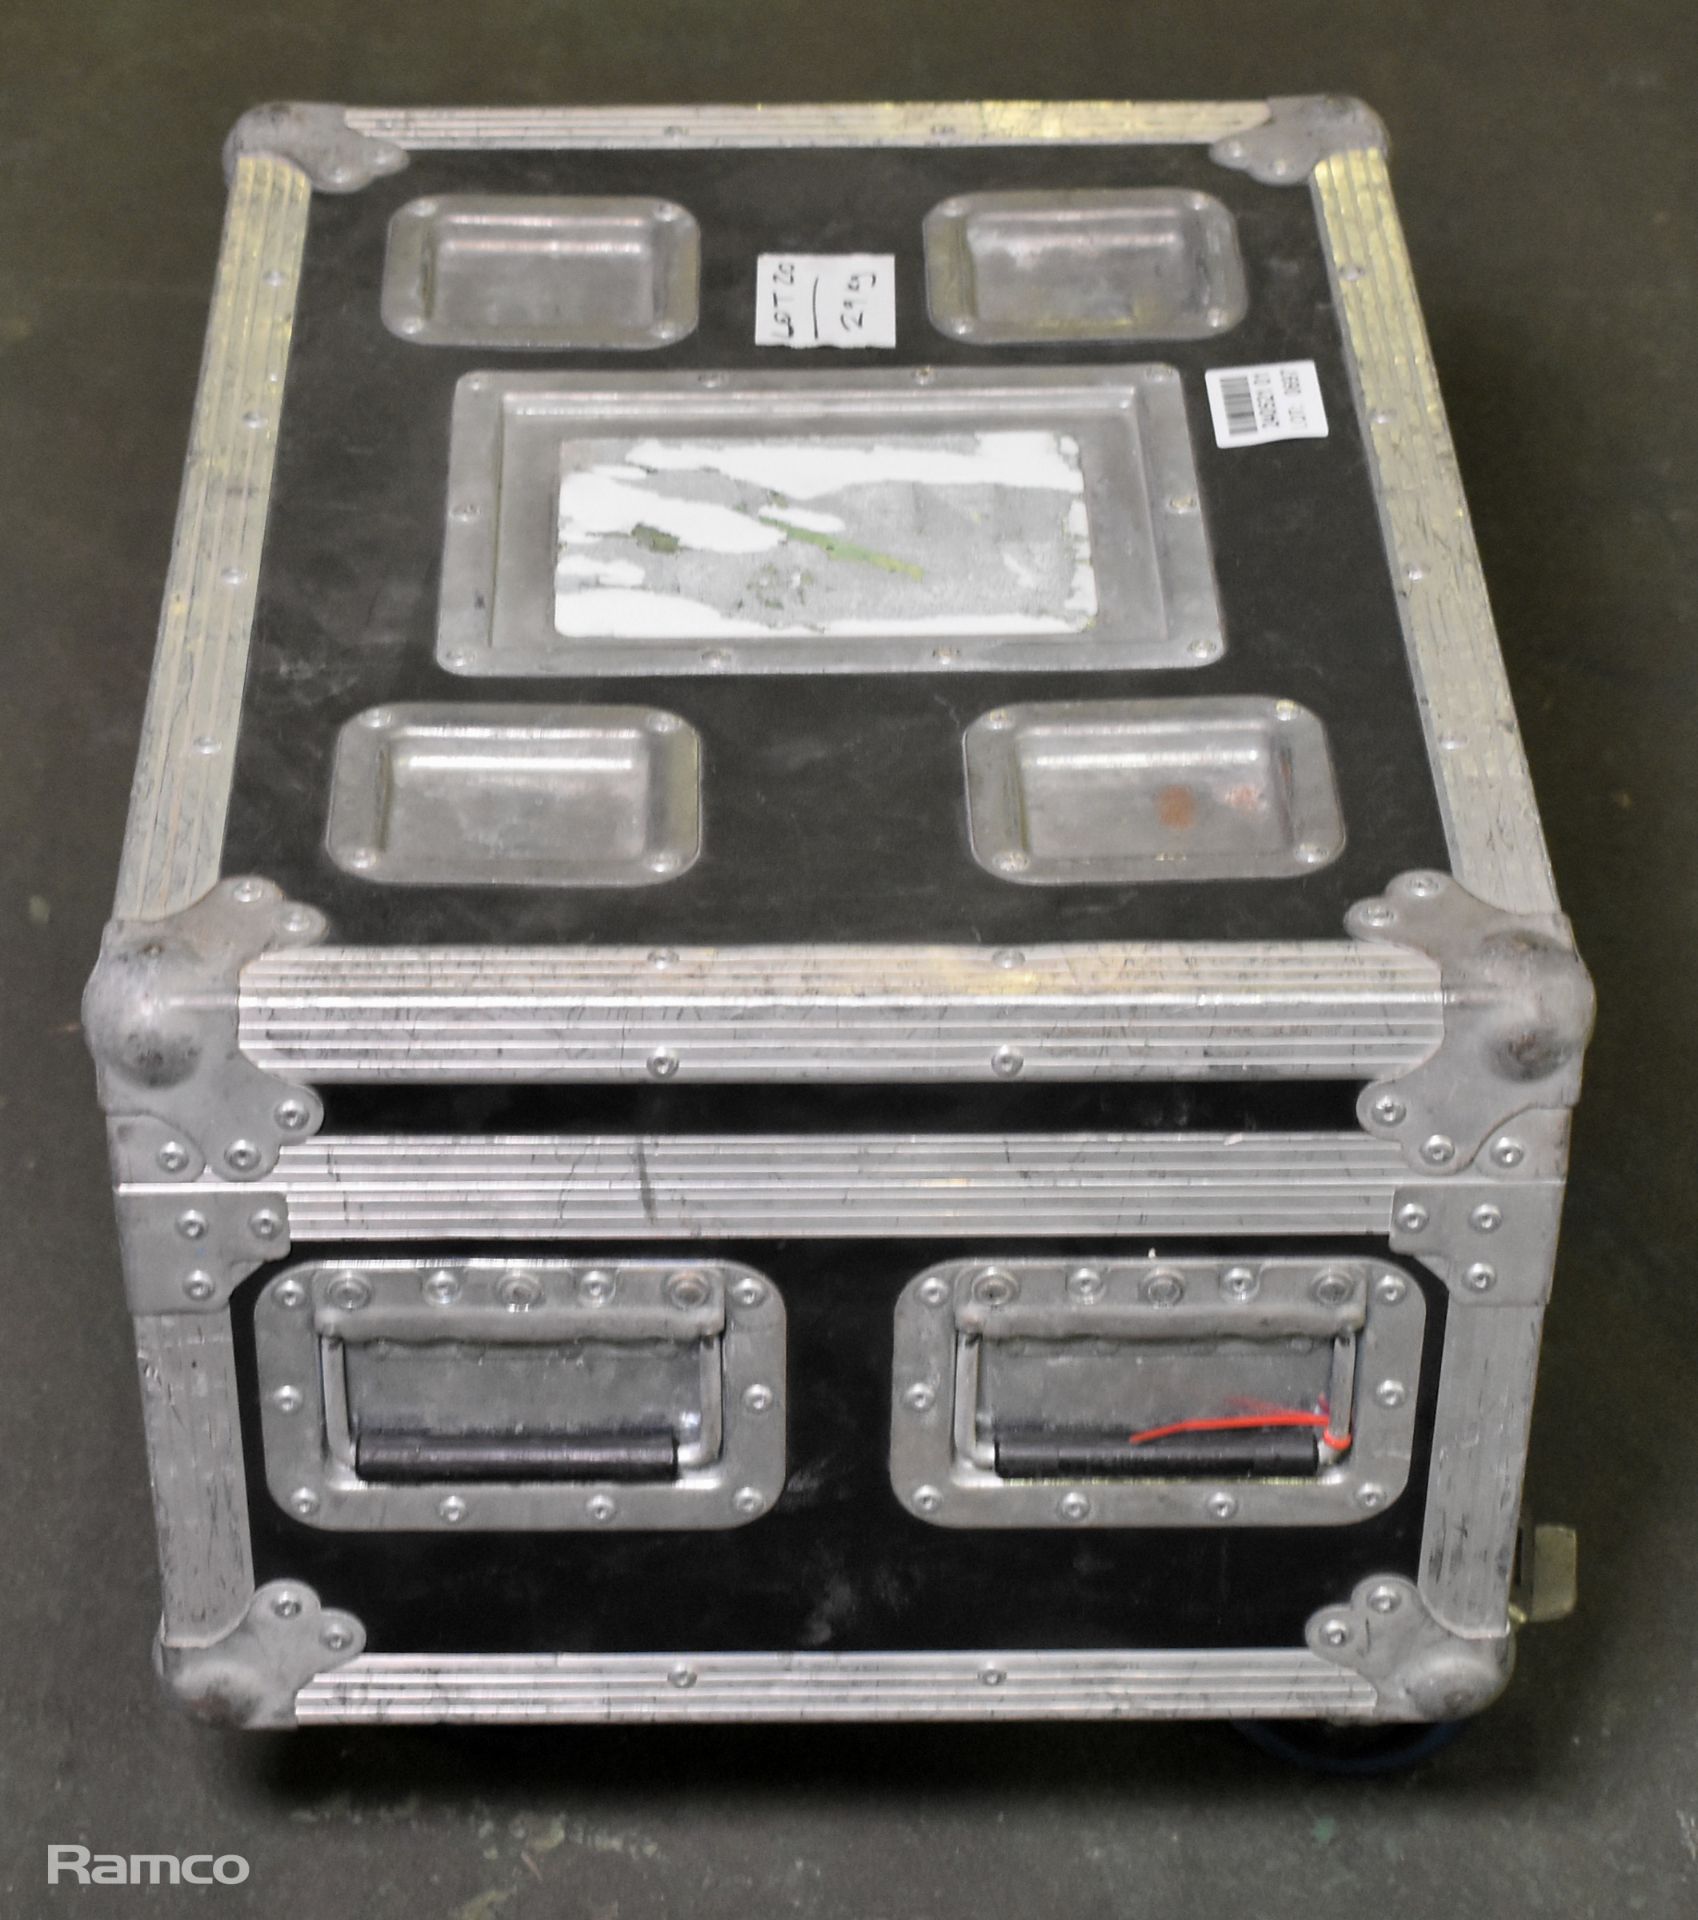 6x Chauvet LED SlimPar Tri7 IRC in flight case with power cables - Image 10 of 11